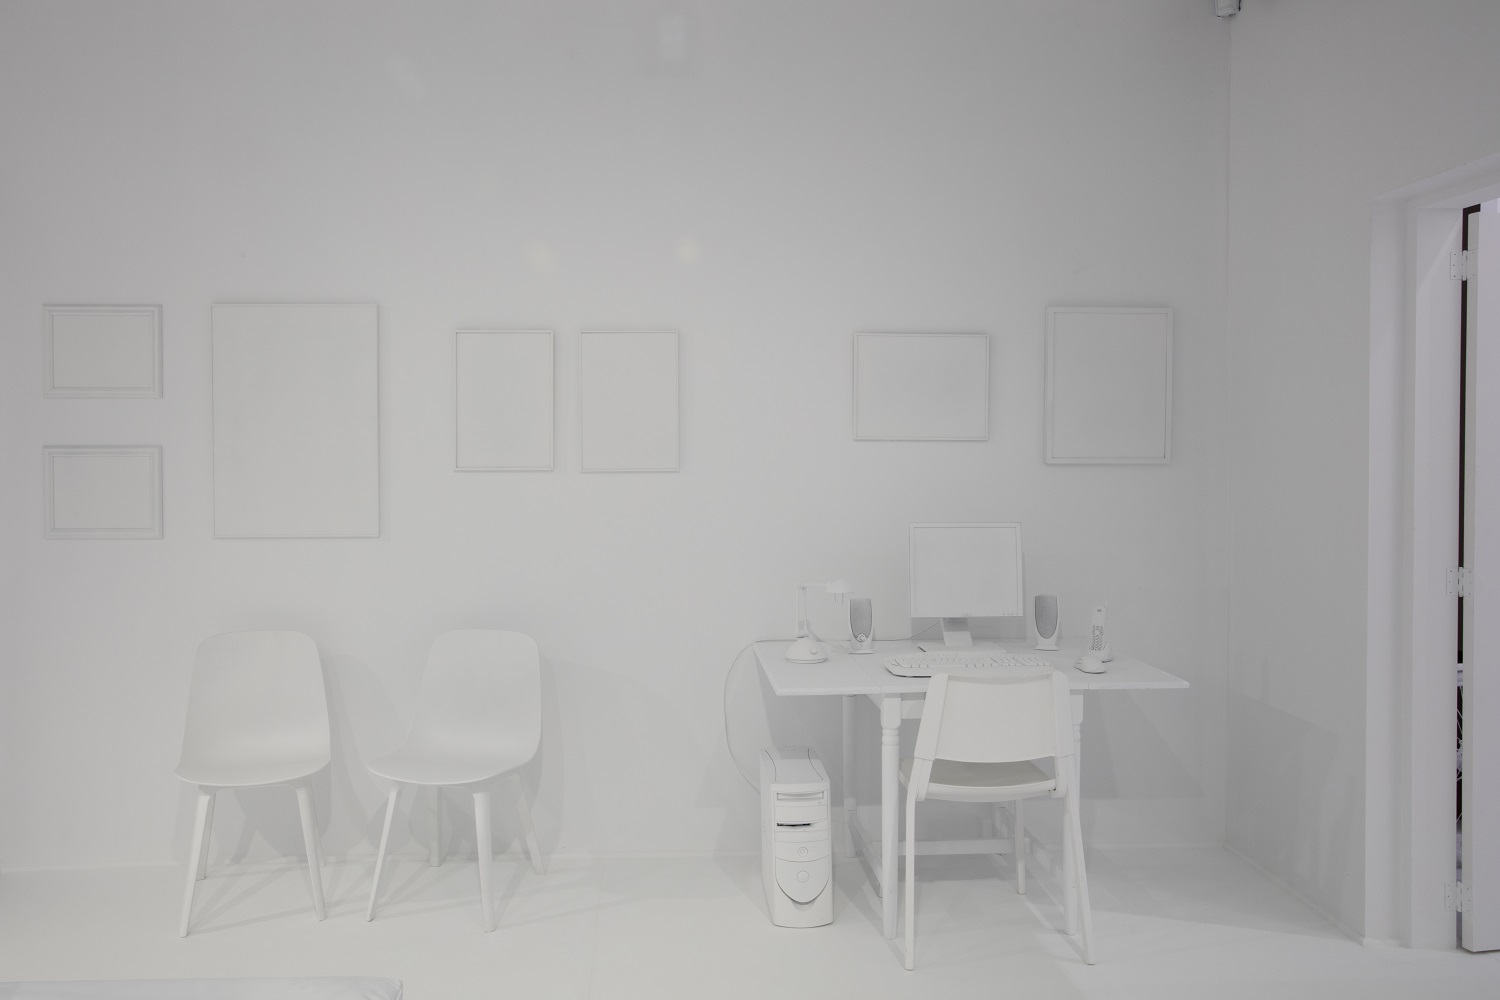 A stark white computer desk and chairs as part of Yayoi Kusama's The Obliteration Room.